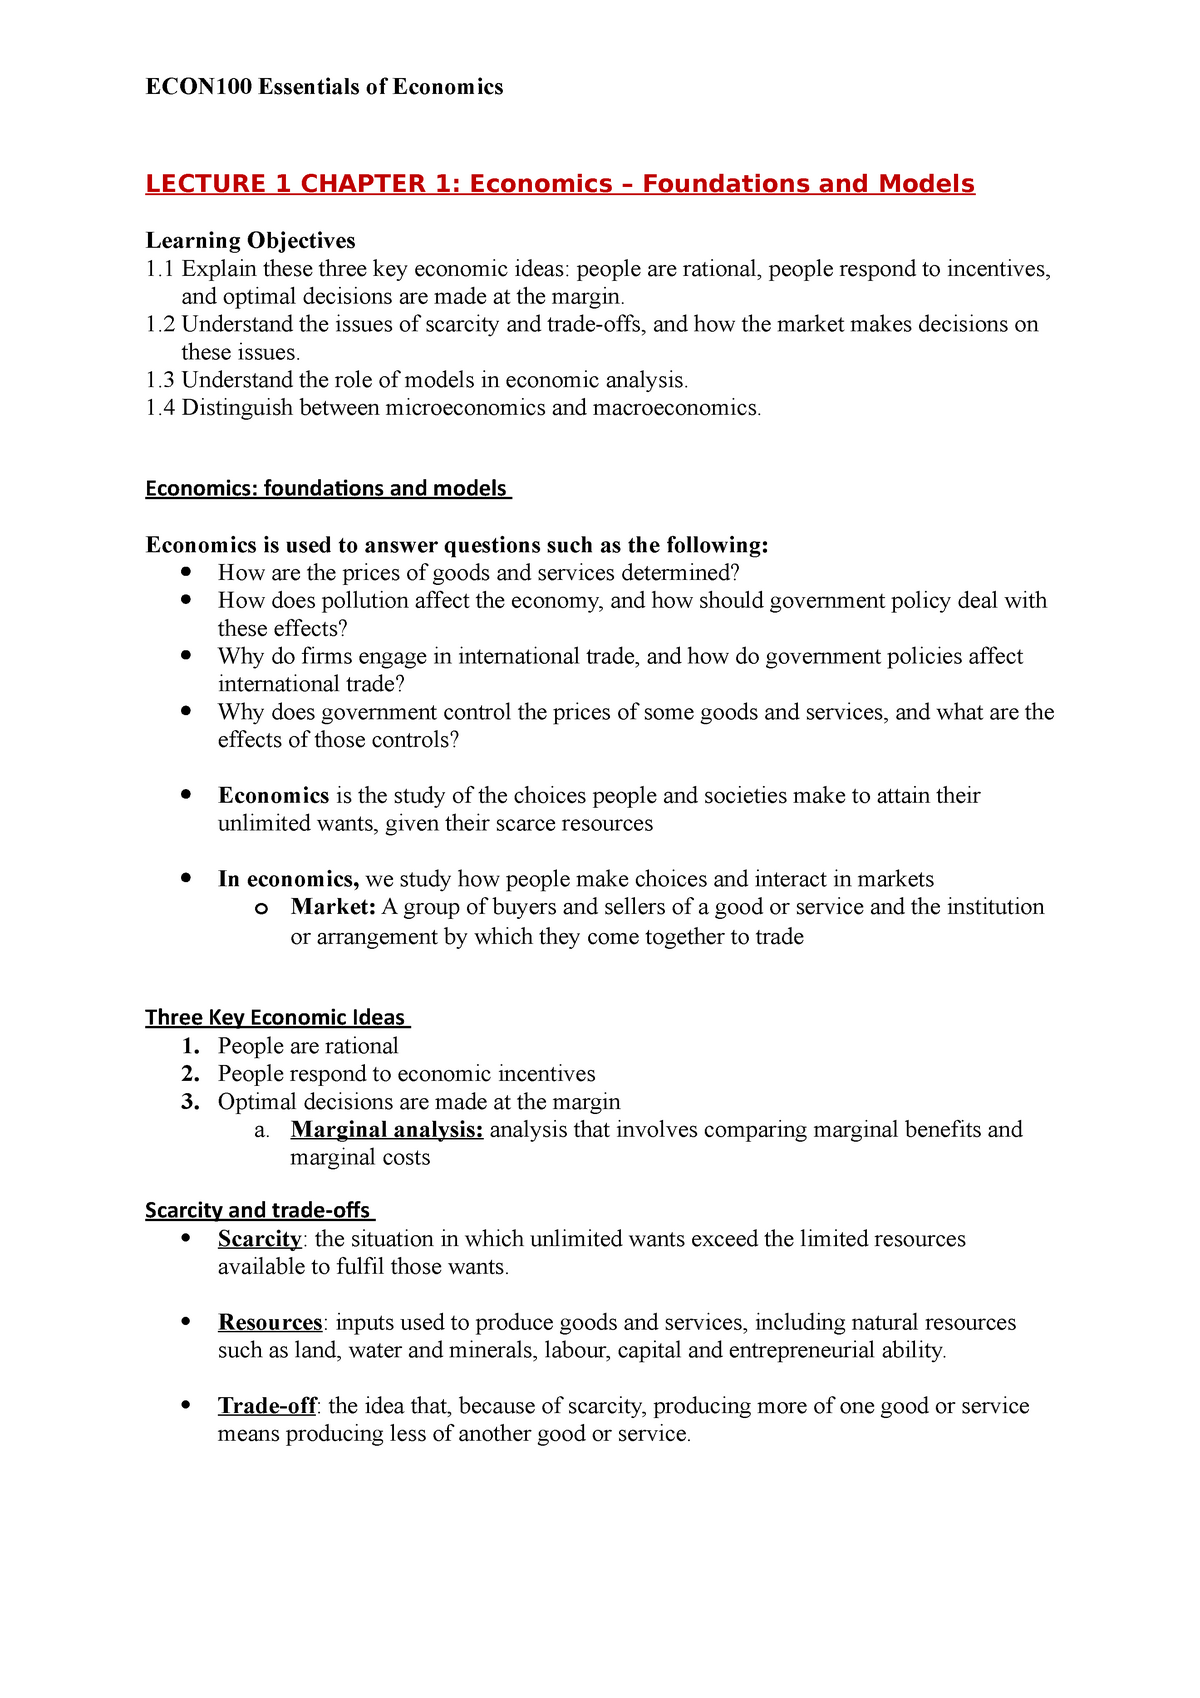 ECON100 Full Study Notes, ECON100 - Economic Essentials for Business - UOW